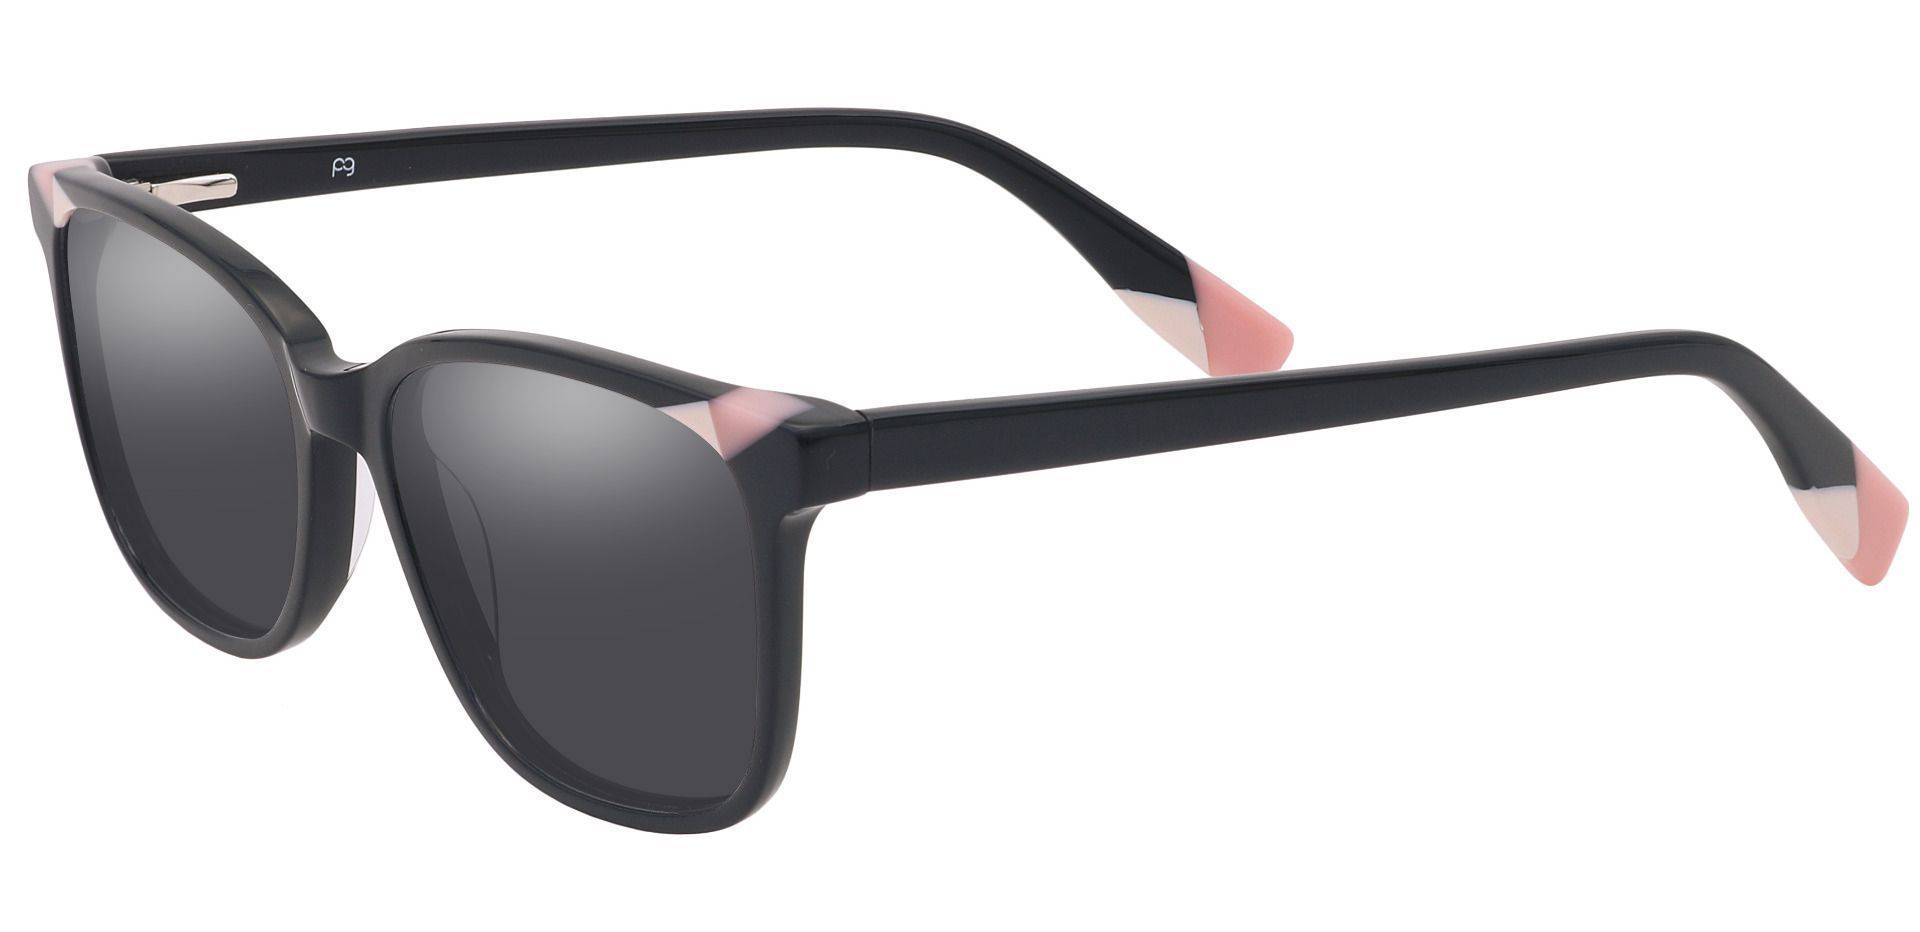 Odessa Square Lined Bifocal Sunglasses -  Pink Frame With Gray Lenses